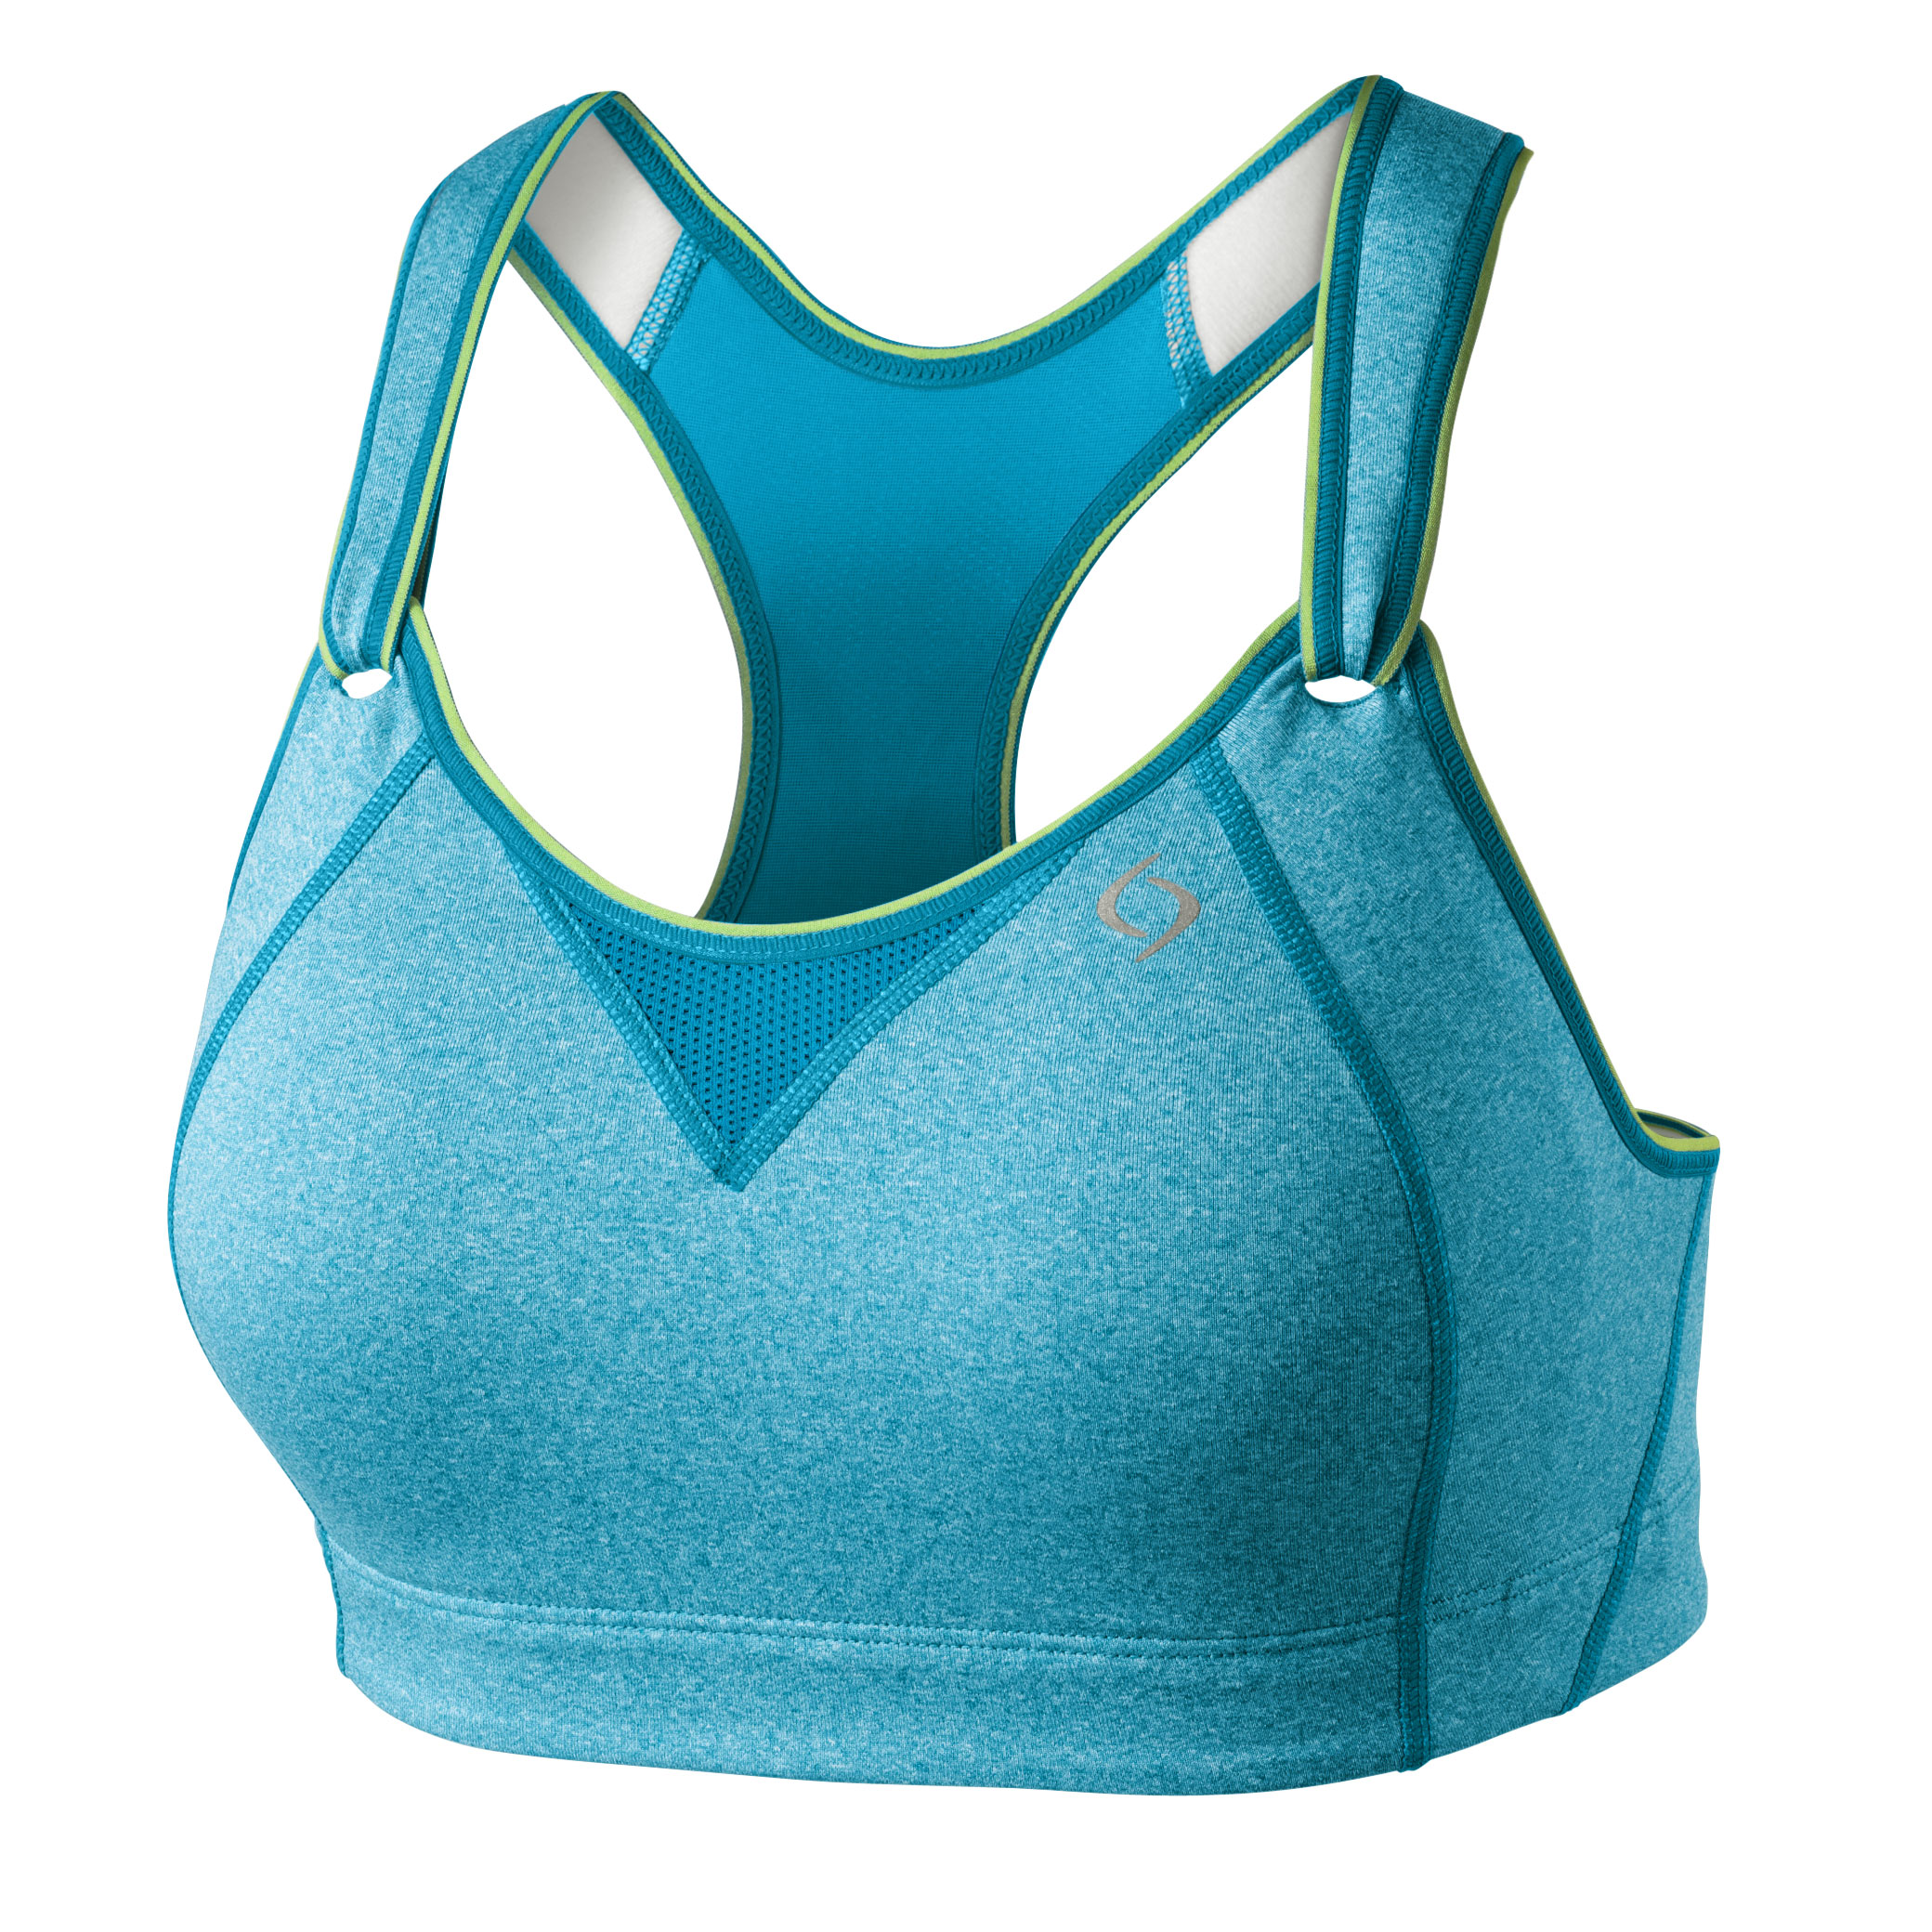 John Lewis Martyna Underwired Sports Bra, Compare